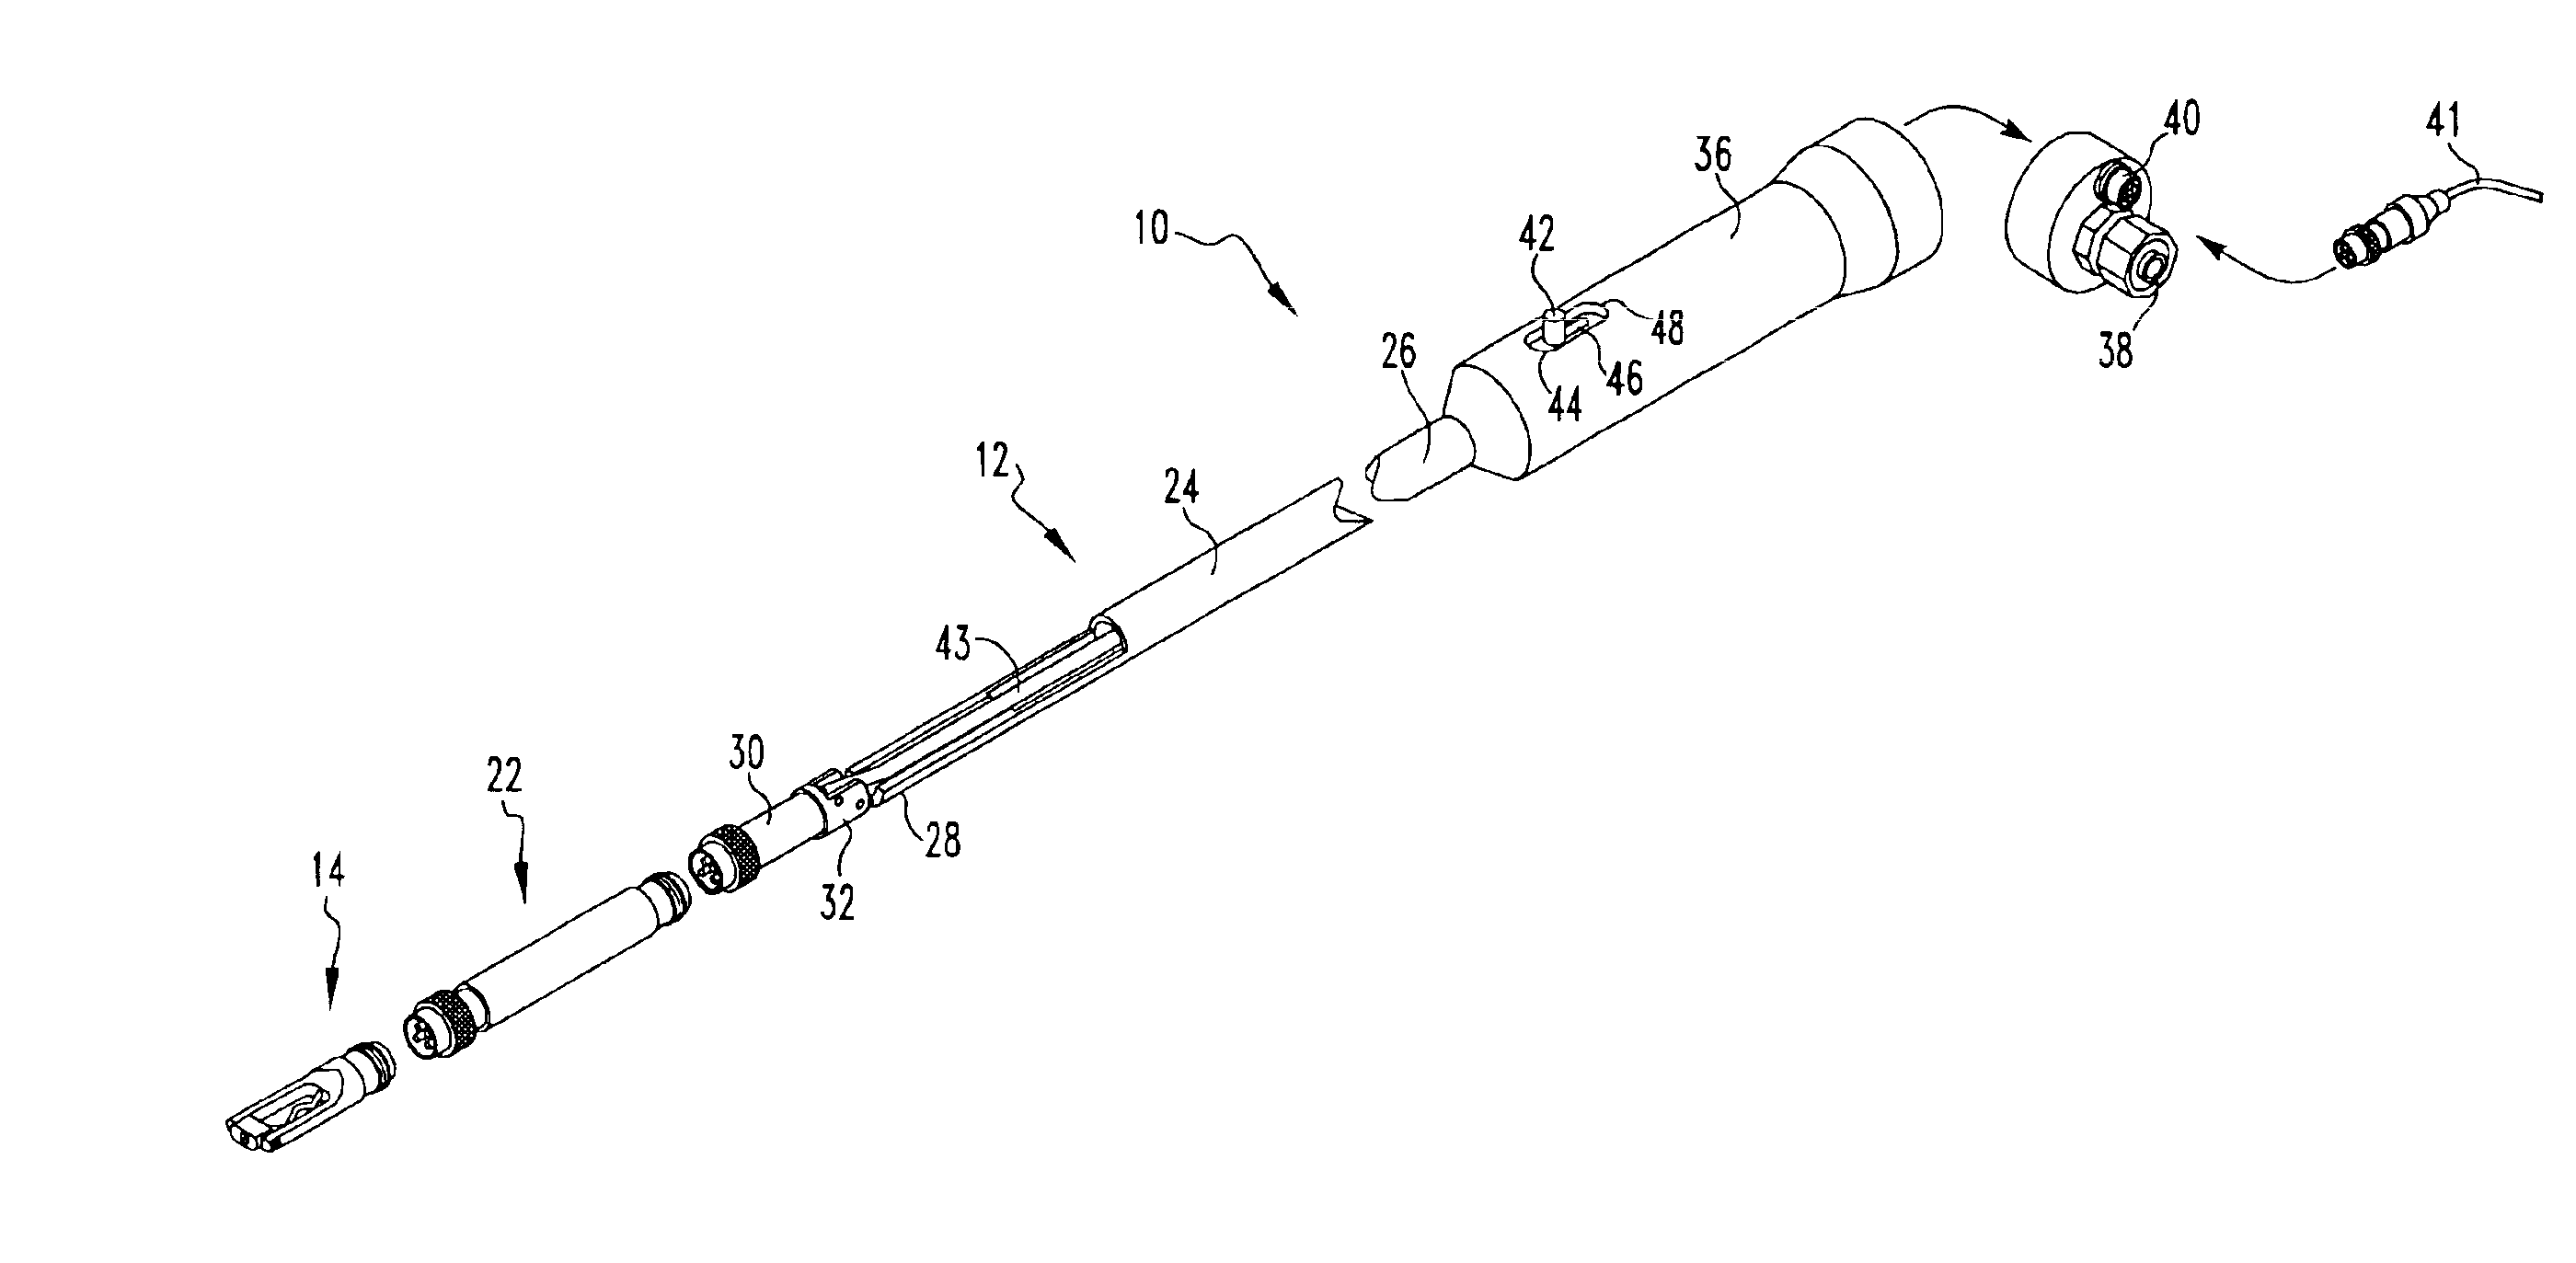 Eddy current inspection probe for inspecting multiple portions of a turbine blade having different geometric surfaces